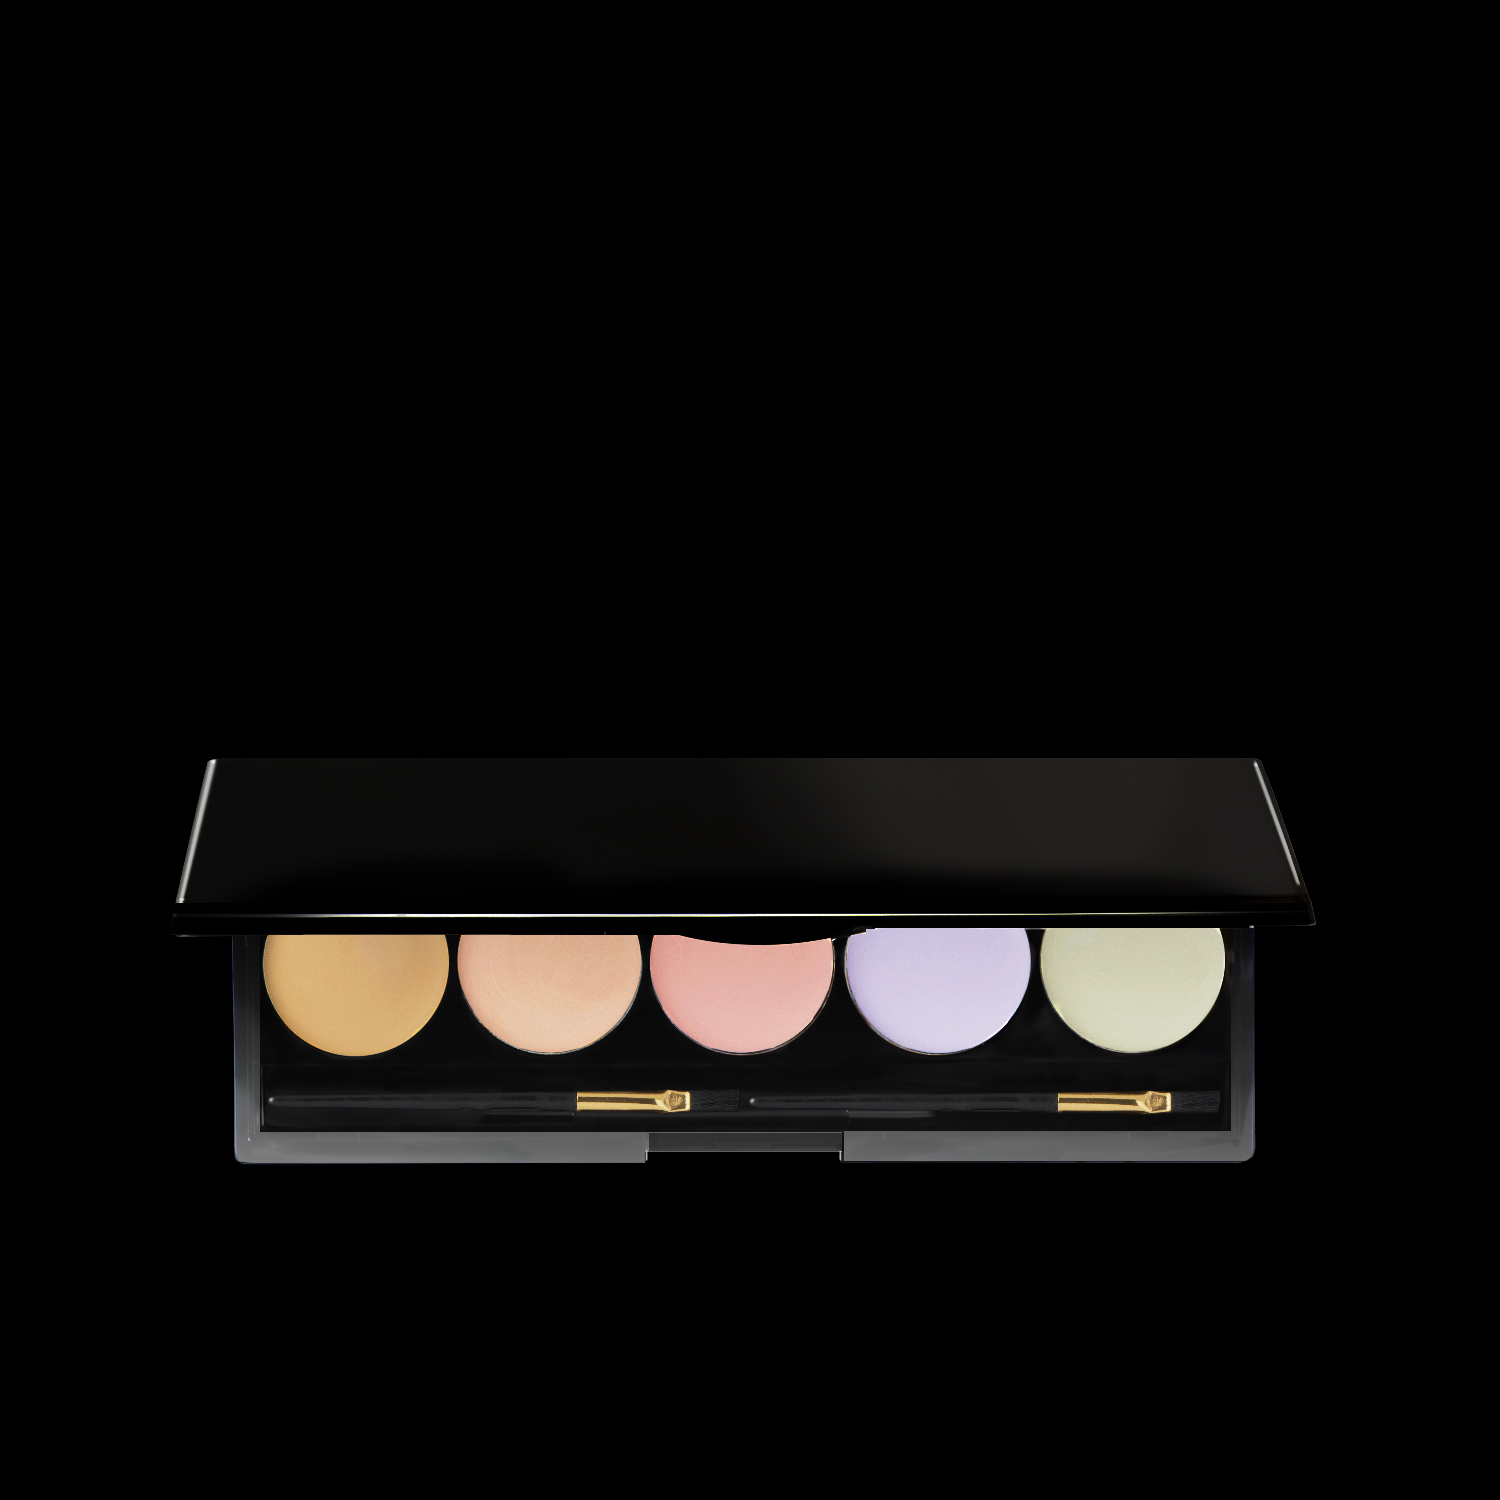 5 Well Colour Corrector pre filled Palette